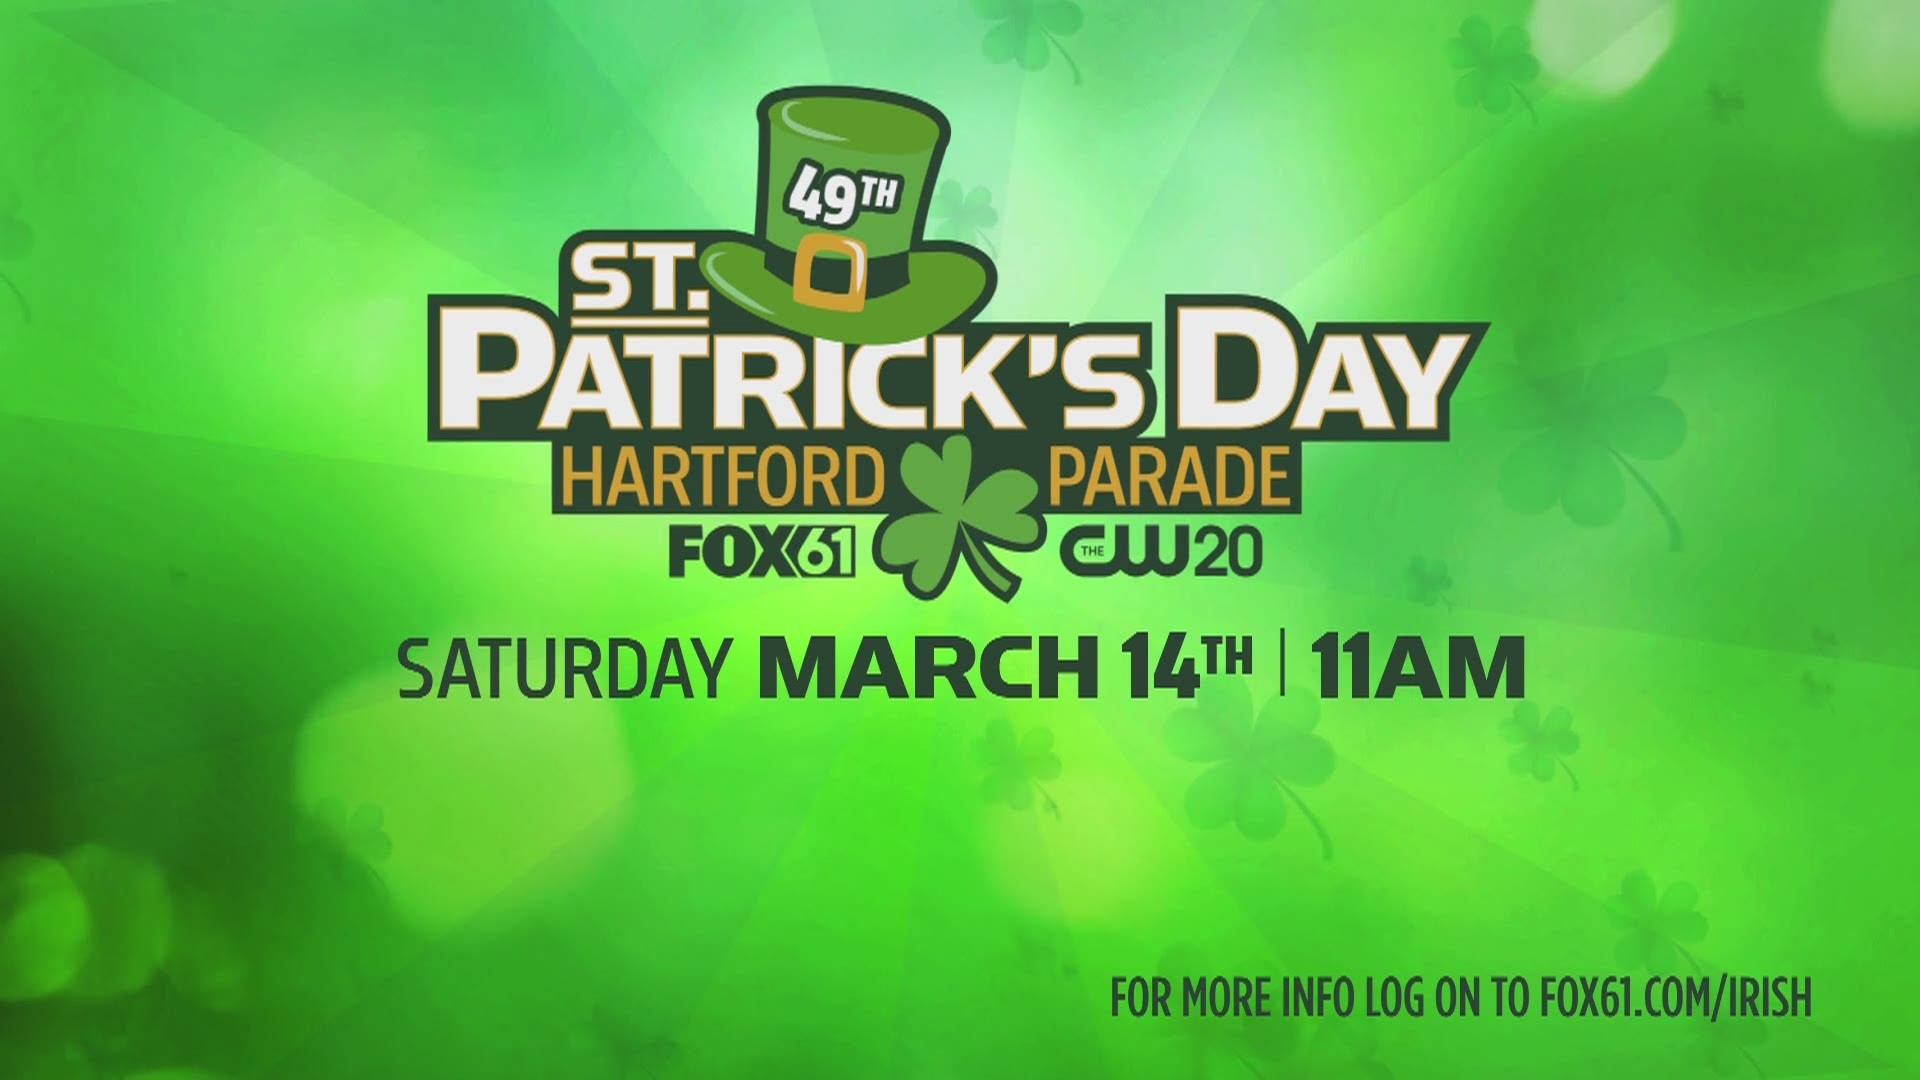 Celebrate at this year's St. Patrick's Day Parade in Hartford on March 14th.